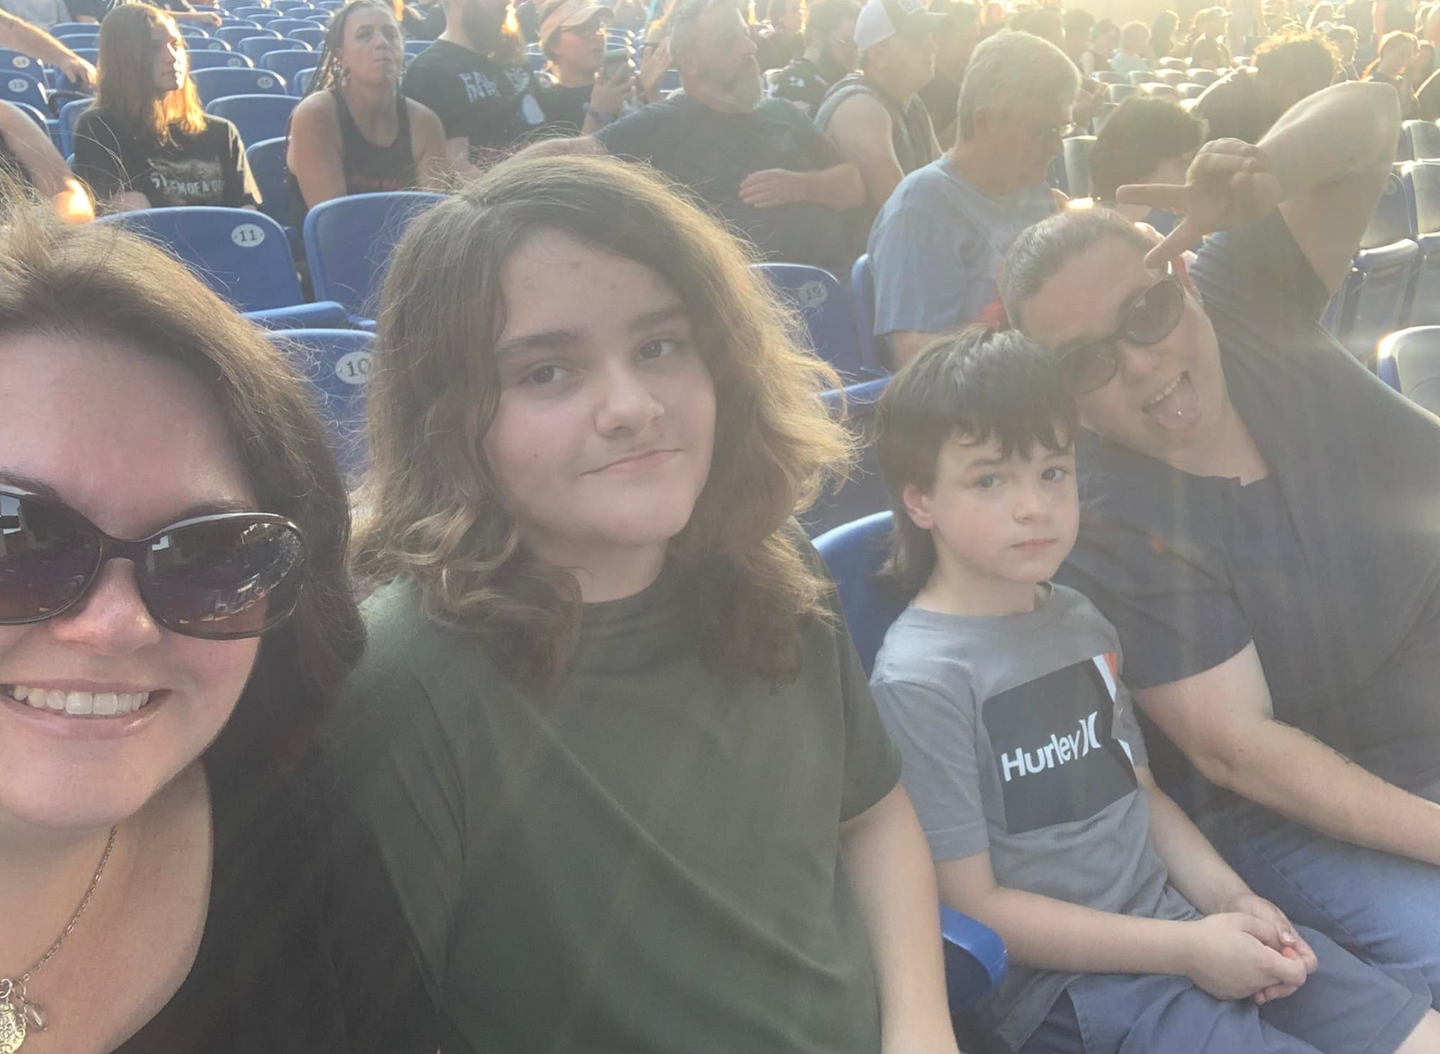 "<em>A big thanks to Live Nation and Vet Tix for the tickets to see Disturbed with Jinjer and Breaking Benjamin in Charlotte NC. My family really enjoyed the show.” -Daniel, U.S. Air Force veteran</em>